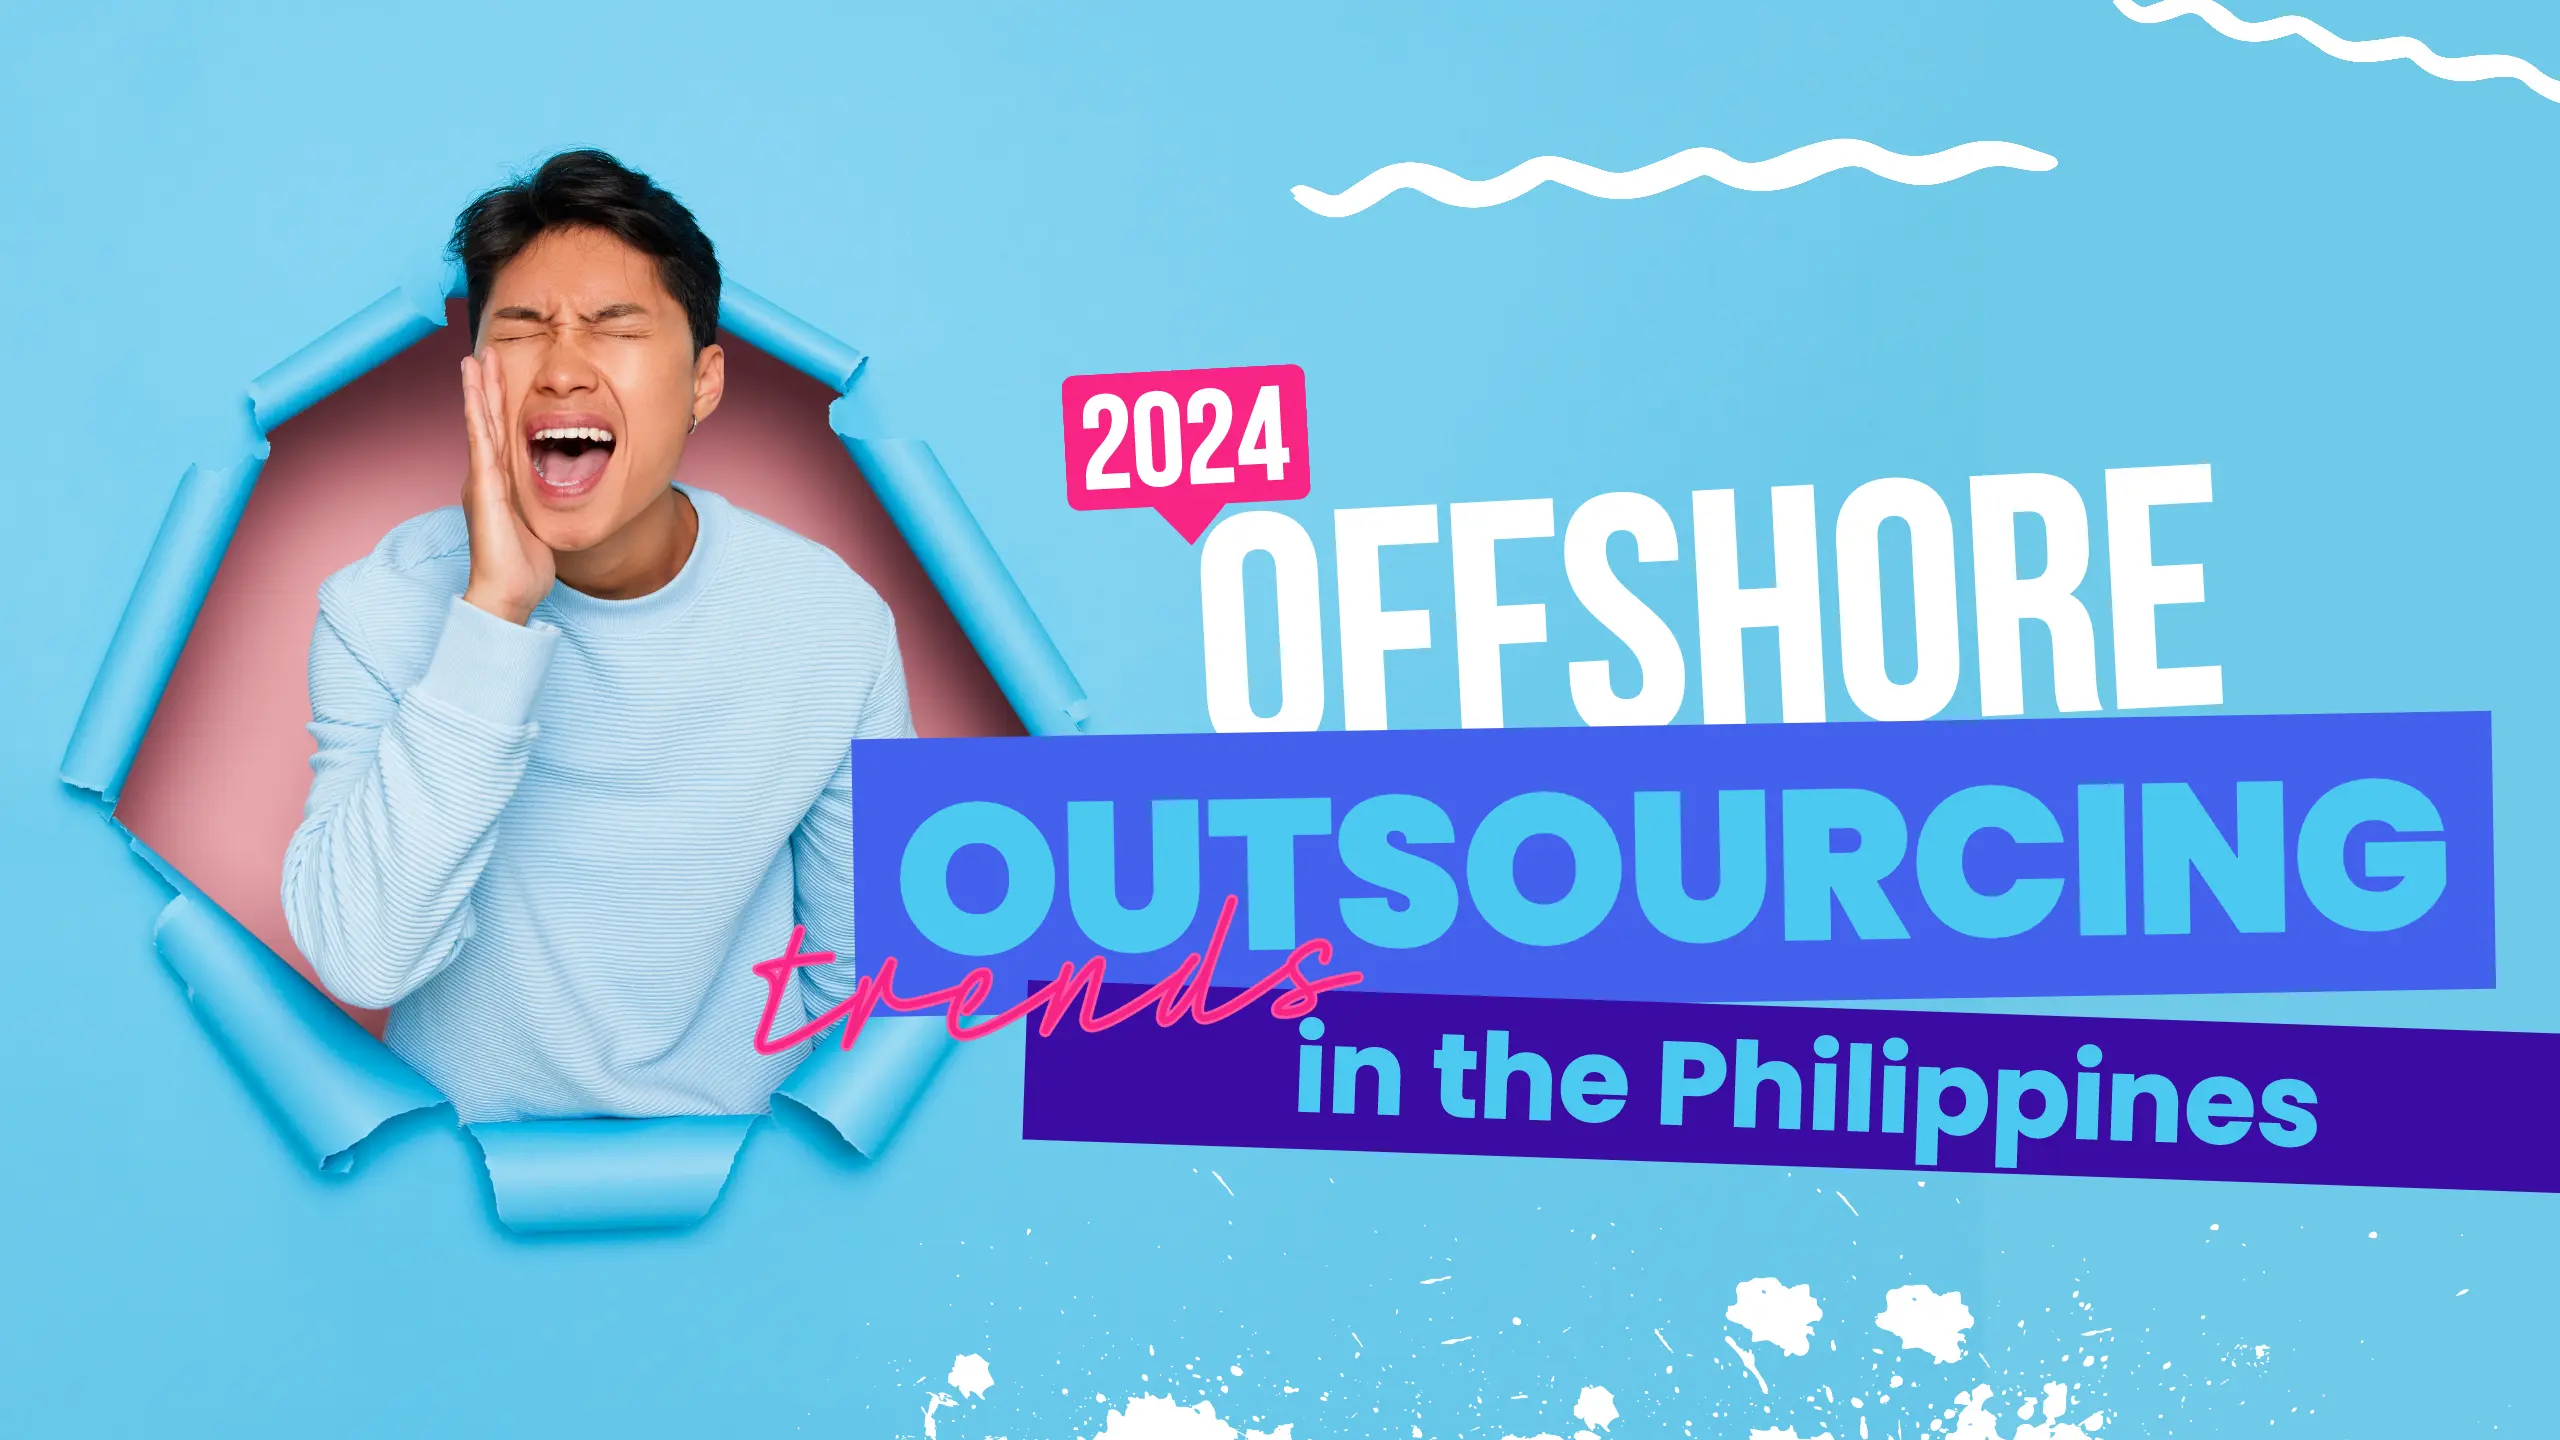 2024 Trends in Offshore Outsourcing in the Philippines